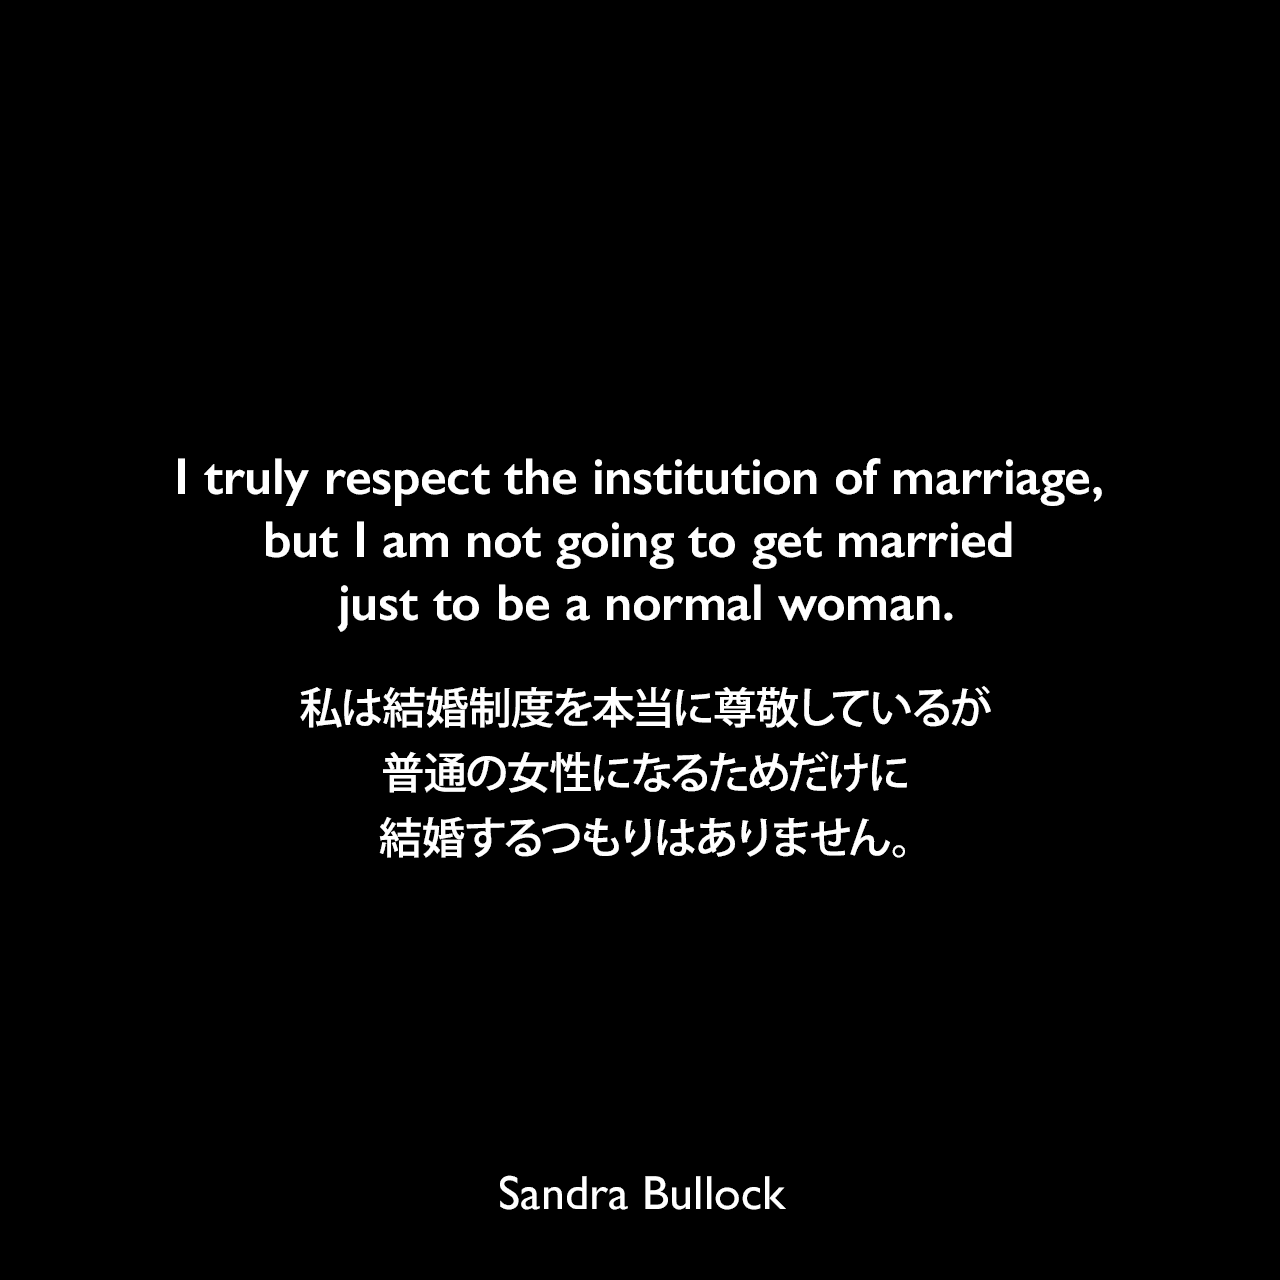 I truly respect the institution of marriage, but I am not going to get married just to be a normal woman.私は結婚制度を本当に尊敬しているが、普通の女性になるためだけに結婚するつもりはありません。Sandra Bullock